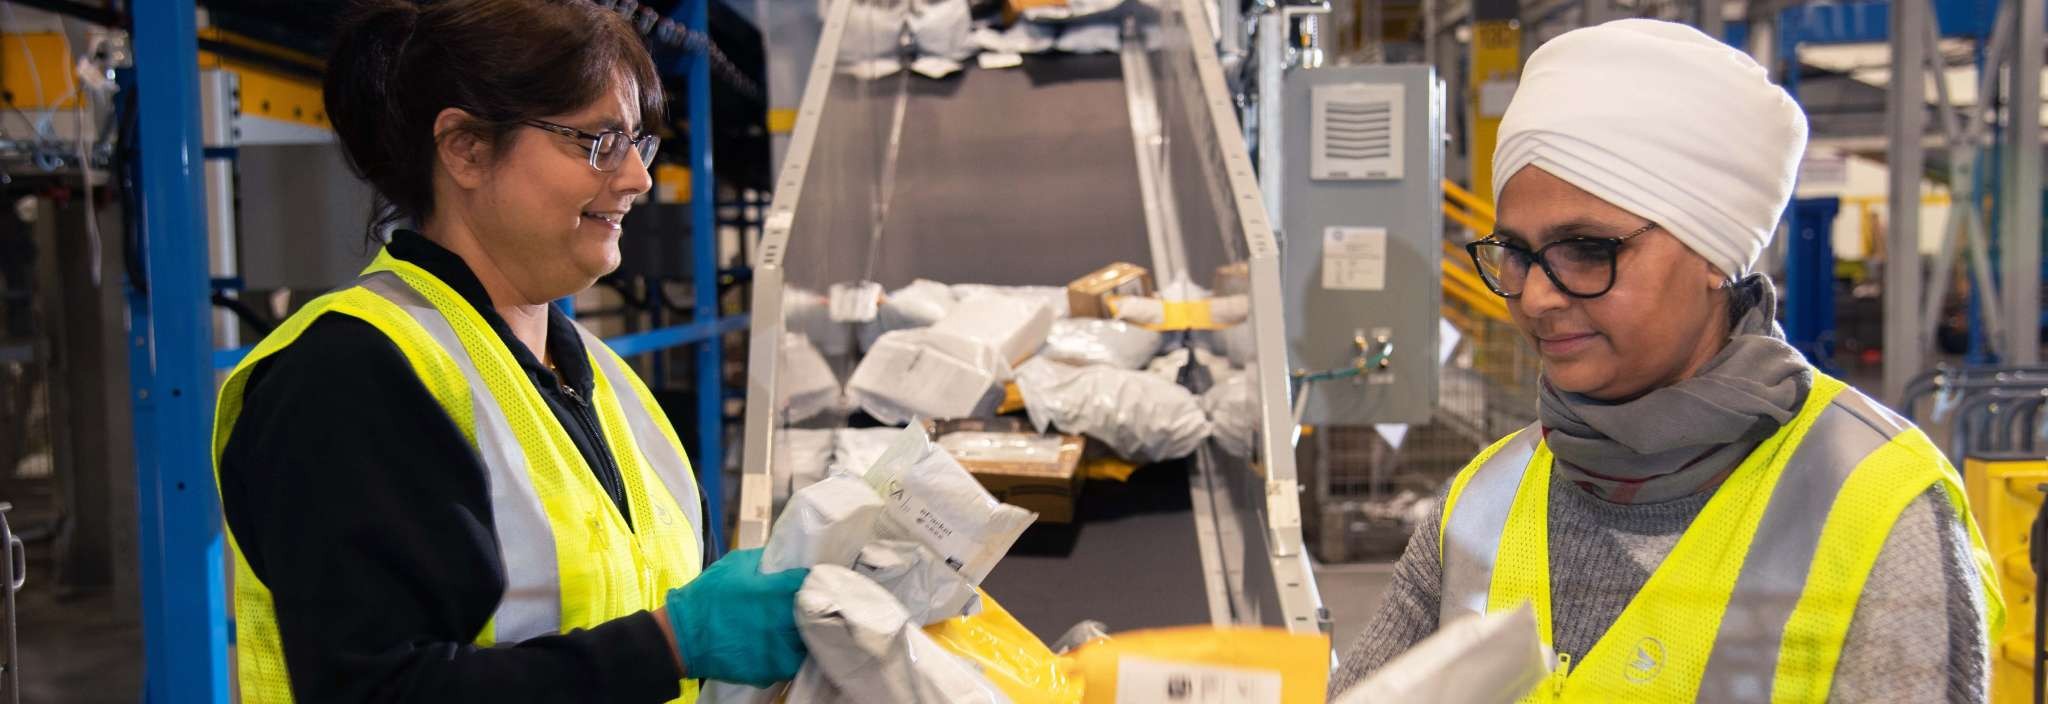 Two female Canada Post employees wearing bright yellow safety vests sort through packages and envelopes.